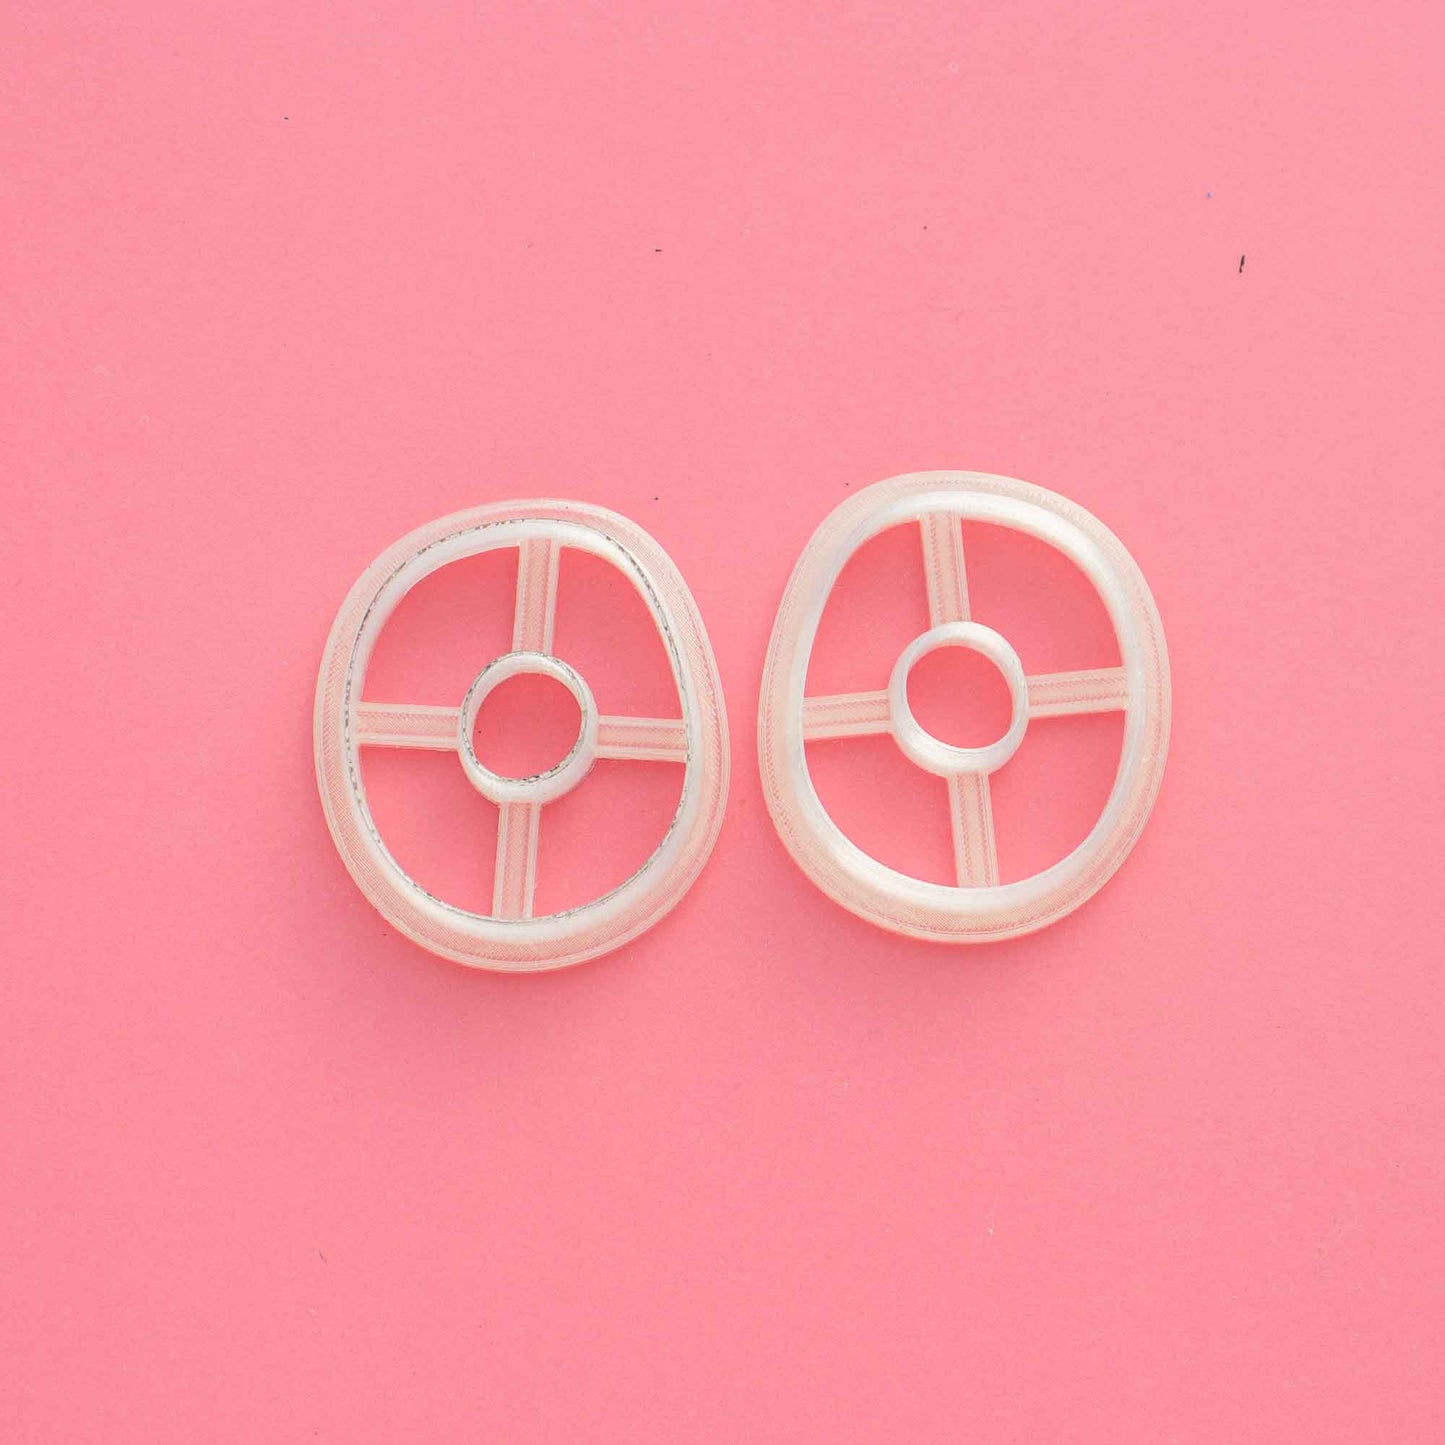 2 mirrored organic circle cutters for clay on a pink background